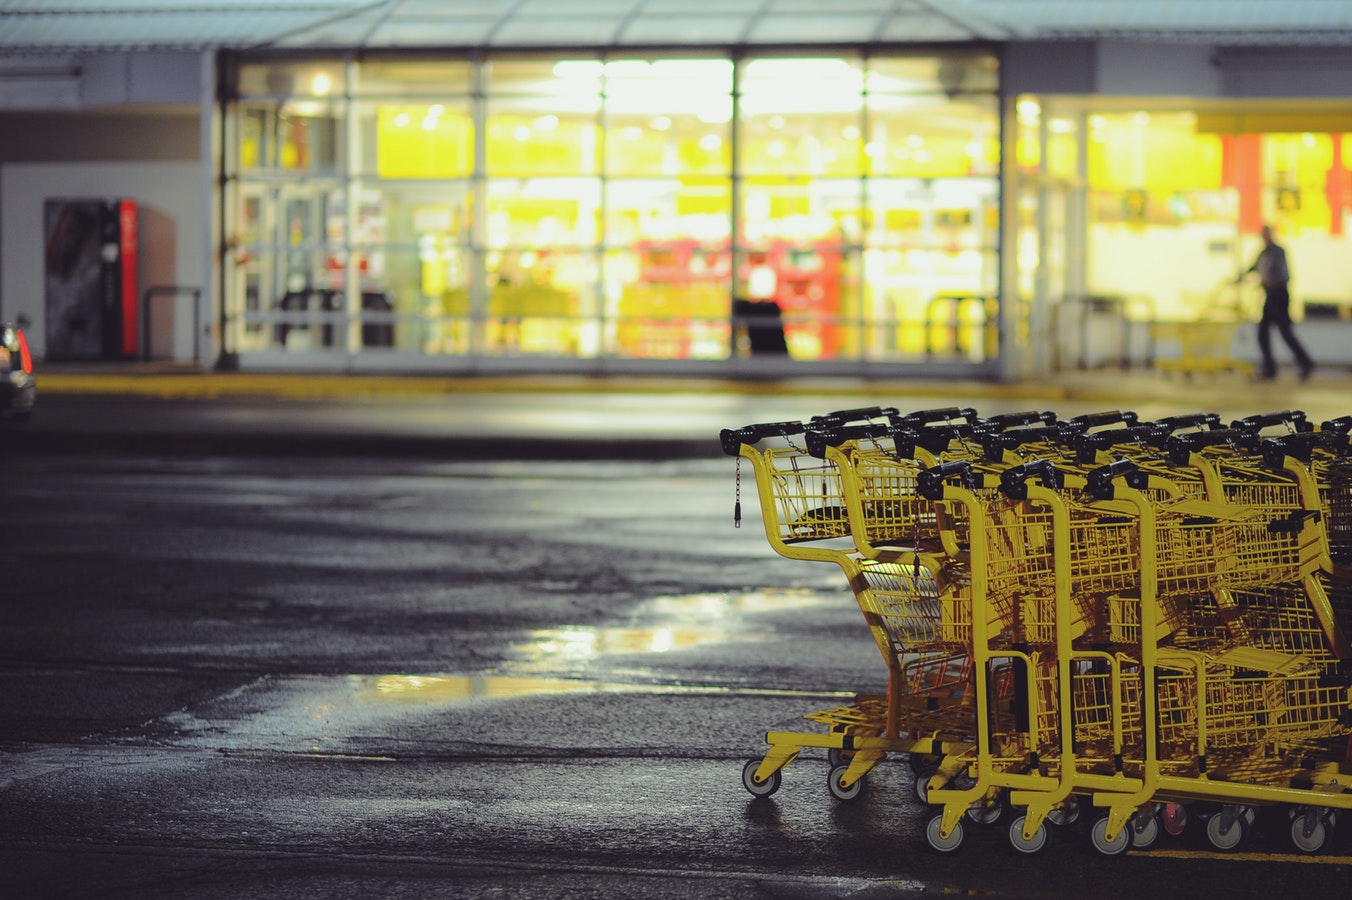 This is an image of yellow shopping carts outside of a store.